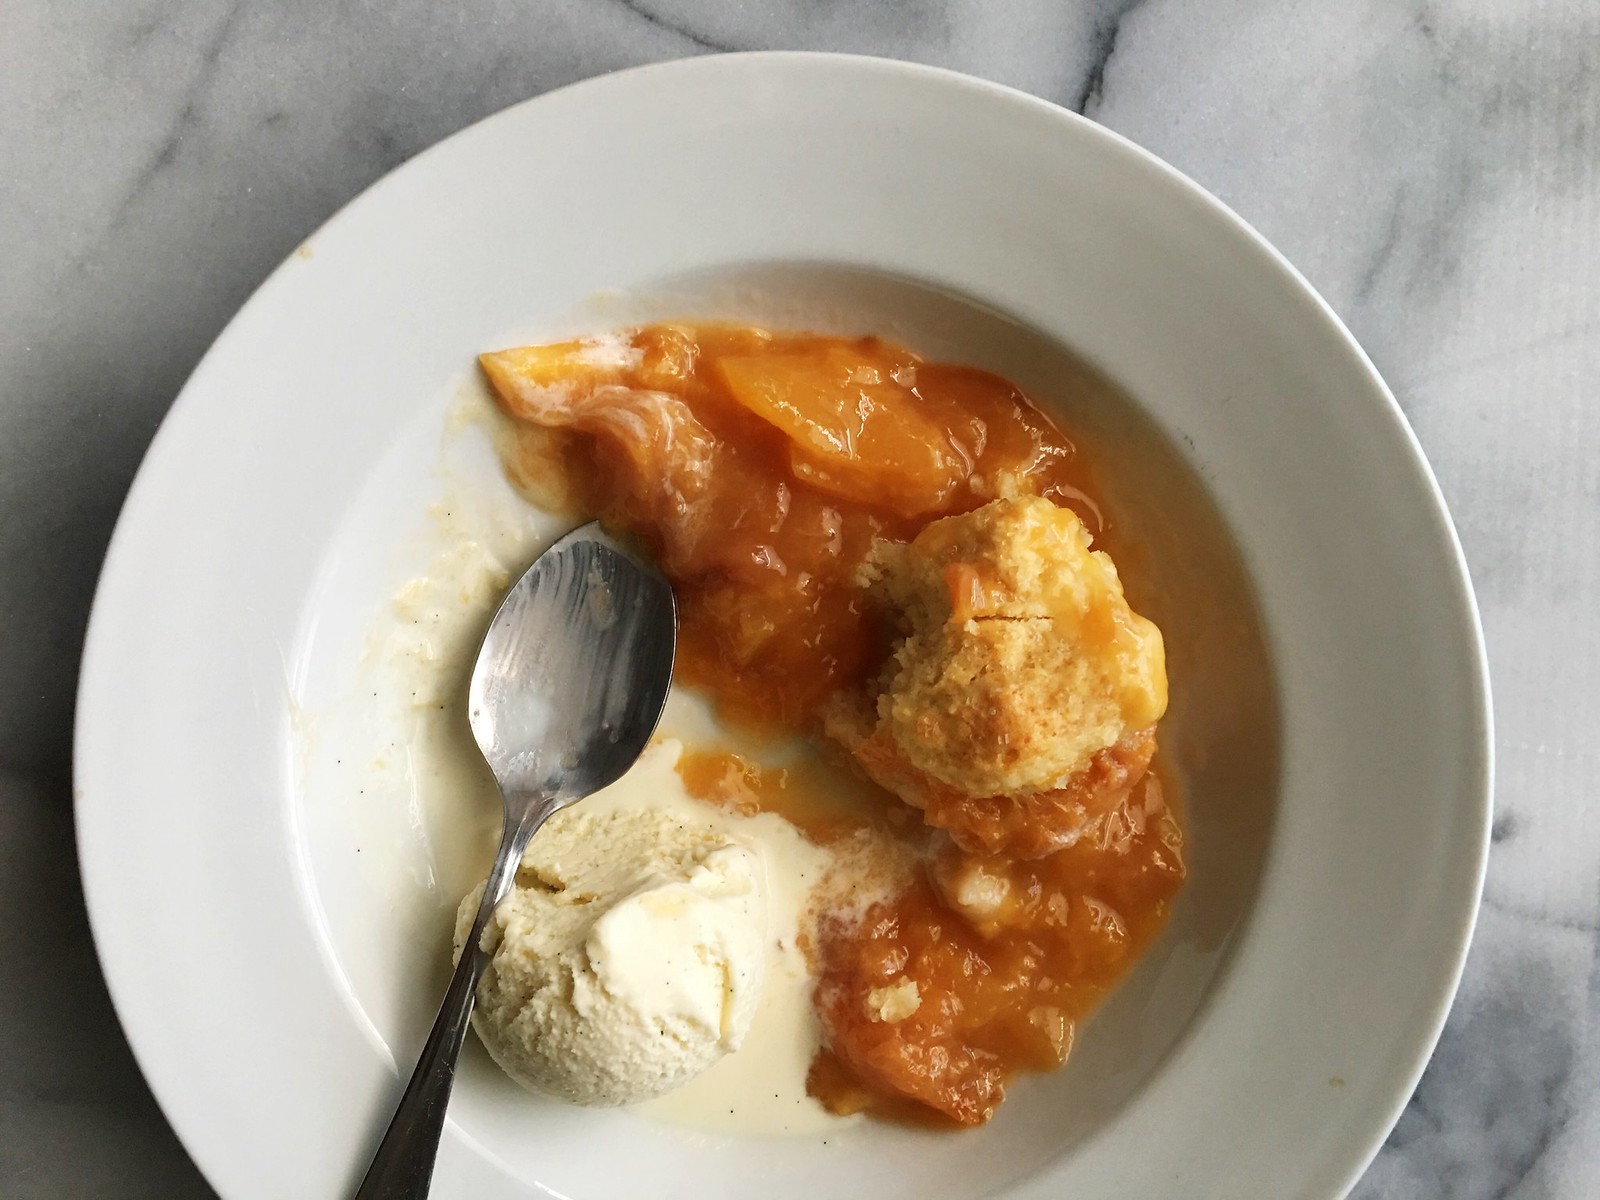 Old Fashioned Peach Cobbler from Kitchen in the Hills. This is a classic southern recipe that's simple to make and perfectly delicious!